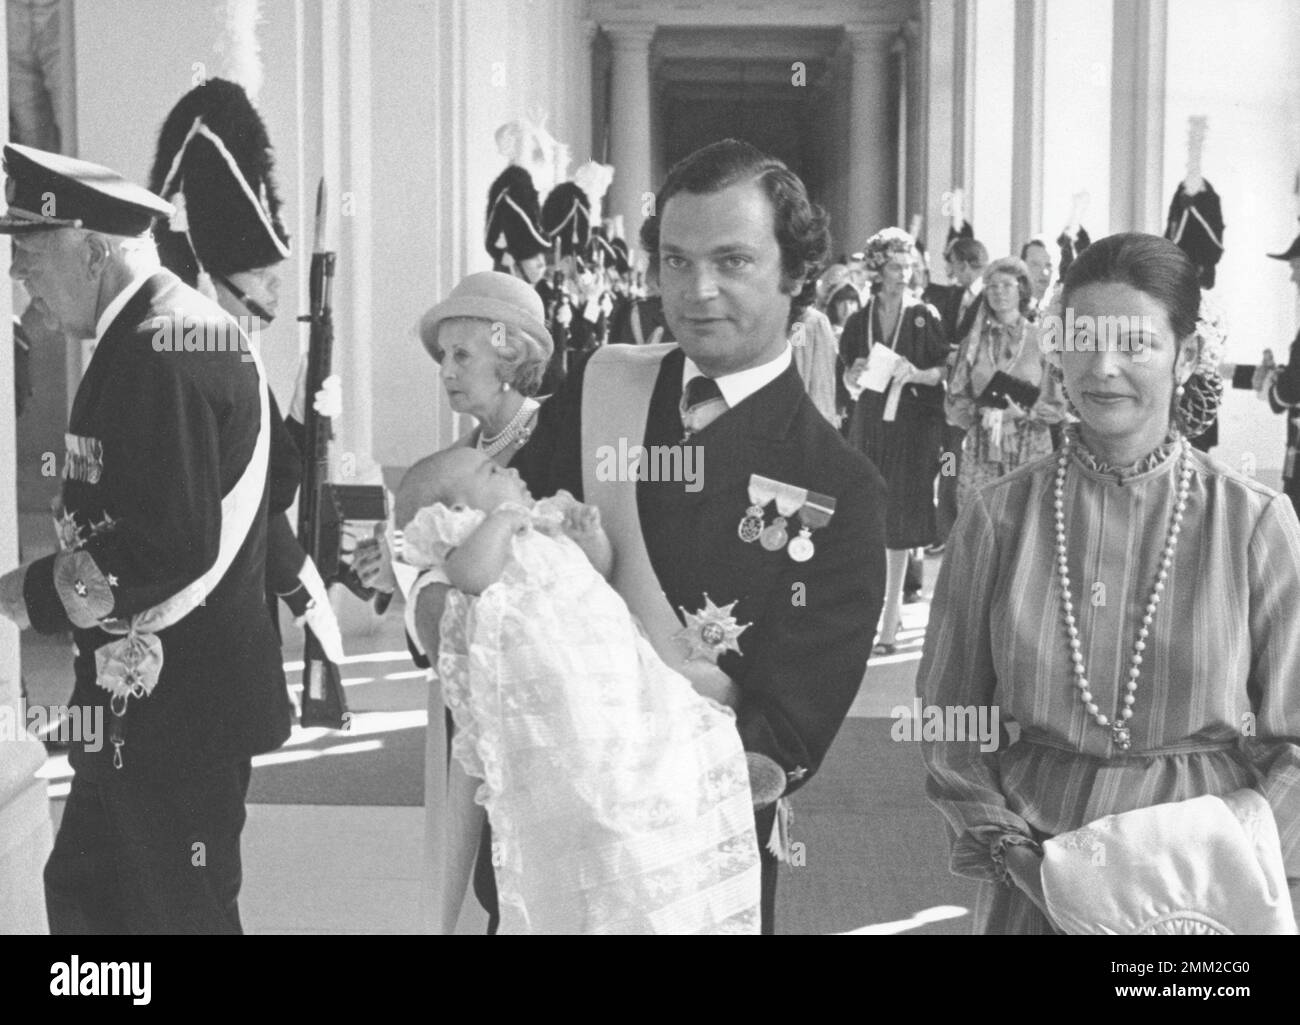 Carl XVI Gustaf, King of Sweden. Born 30 april 1946. Pictured with Queen Silvia and crown princess Victoria on the day of her being baptised 27 september 1977. Her full name is Victoria Ingrid Alice Désirée. Stock Photo